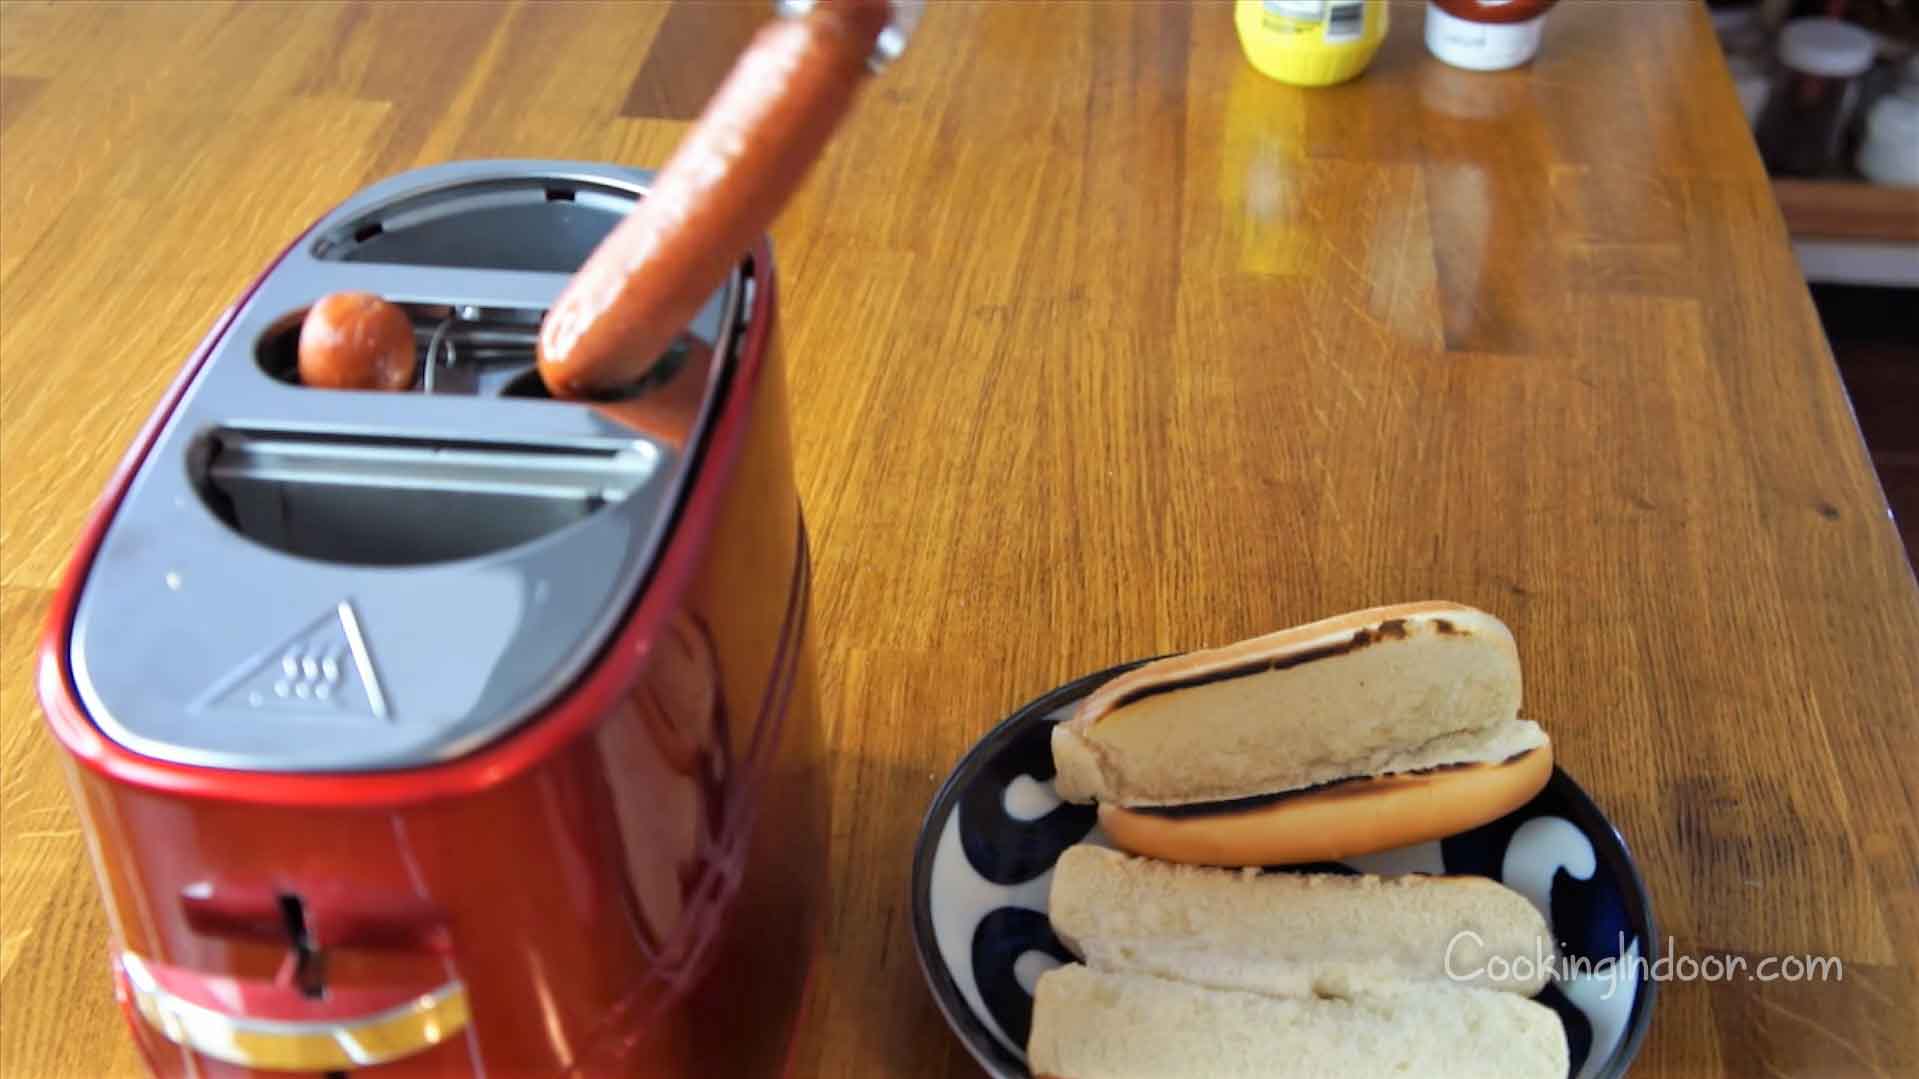 HOT DOG TOASTER REVIEW?!?! 